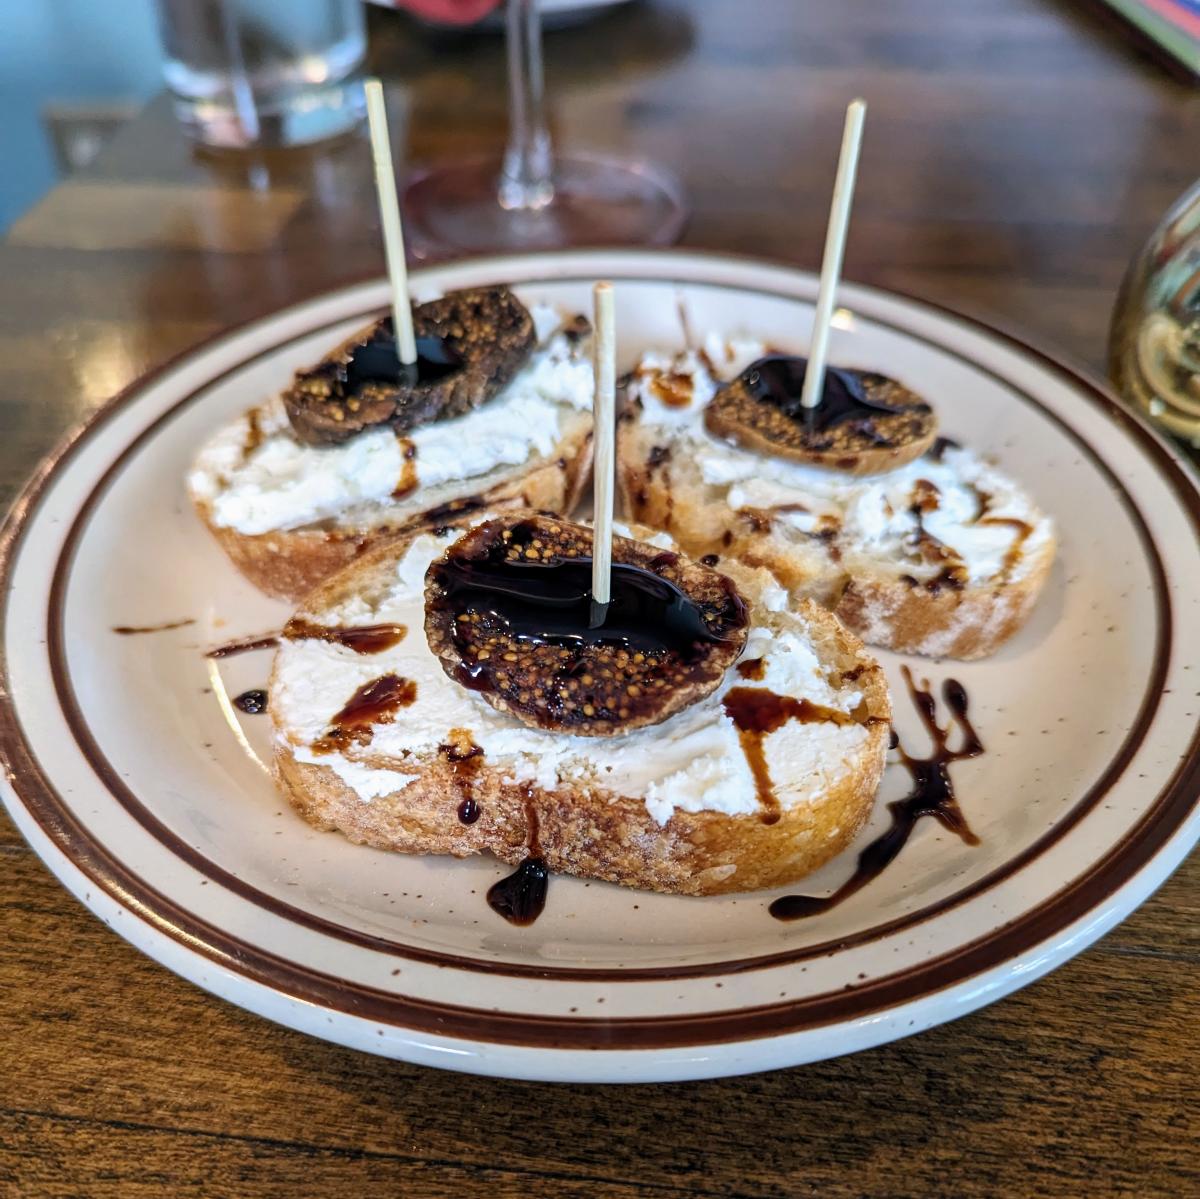 Image is of 3 baguette bread slices with sheep's milk cheese topped with dried fig and a balsamic reduction.